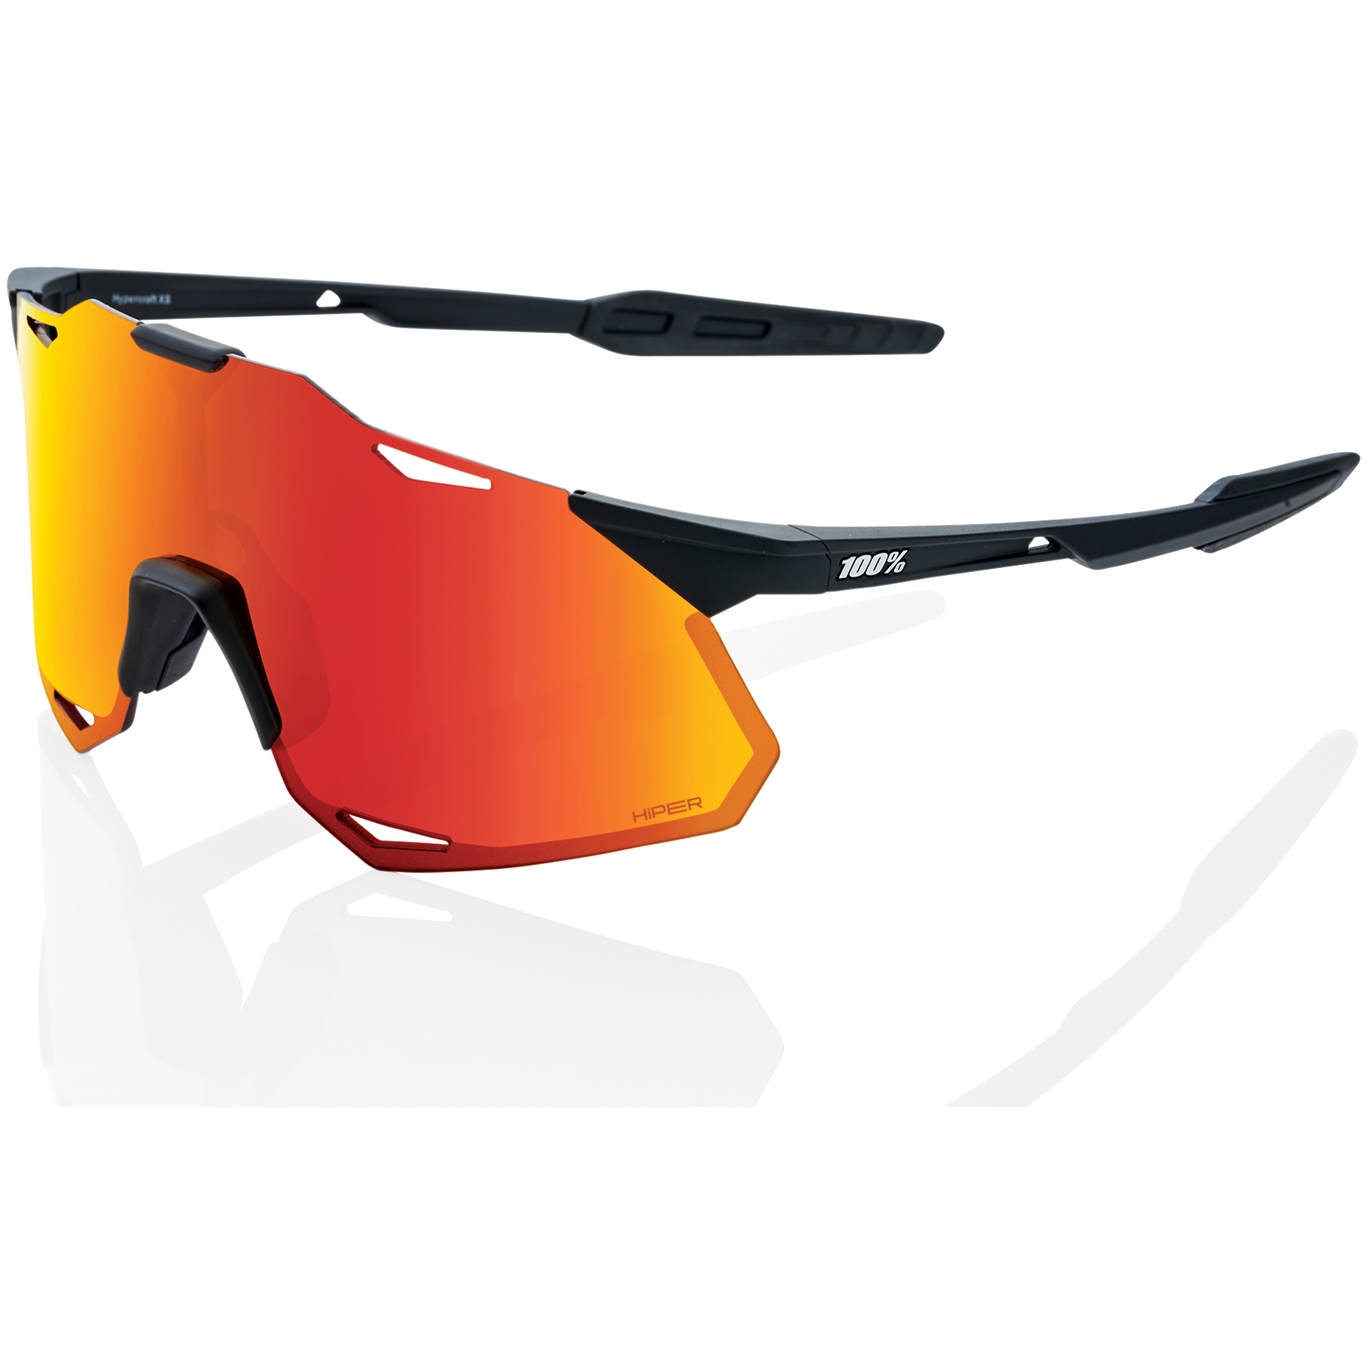 Productfoto van 100% Hypercraft XS Glasses - HiPER Mirror Lens - Soft Tact Black / Red Multilayer + Clear